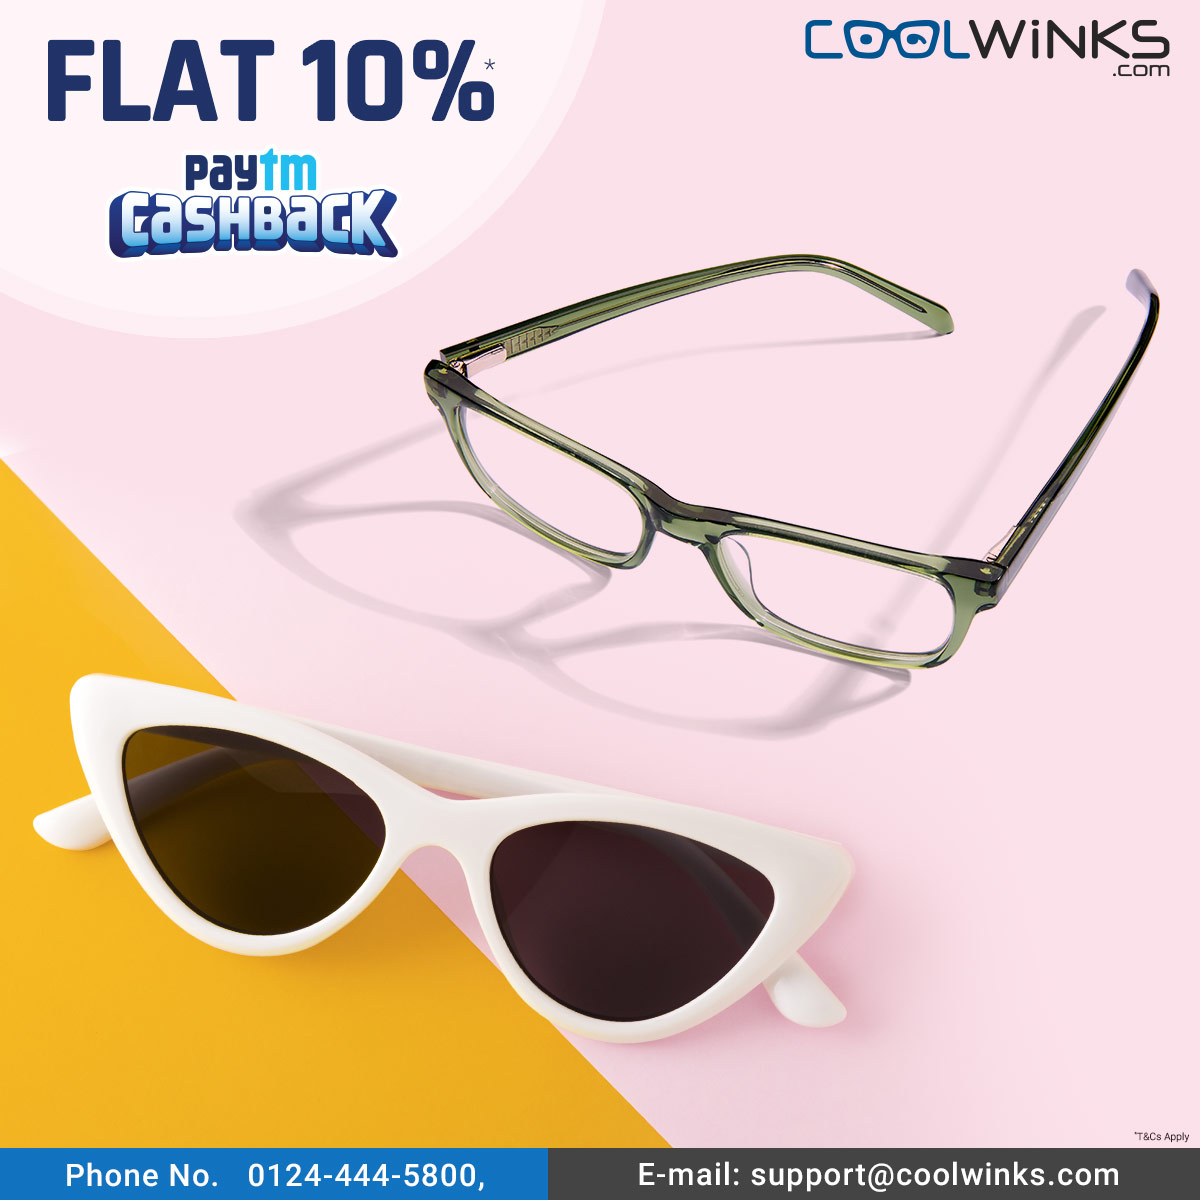 CoolWinks - Save big on your fashion goals with #Paytm. Now shop your  treasured #eyeglasses & #sunglasses with #Paytm and get 100% Cashback Rs.  1000*. #HowCoolIsThat #CoolWalaLook *T&Cs Apply: https://bit.ly/2N8J3kY |  Facebook